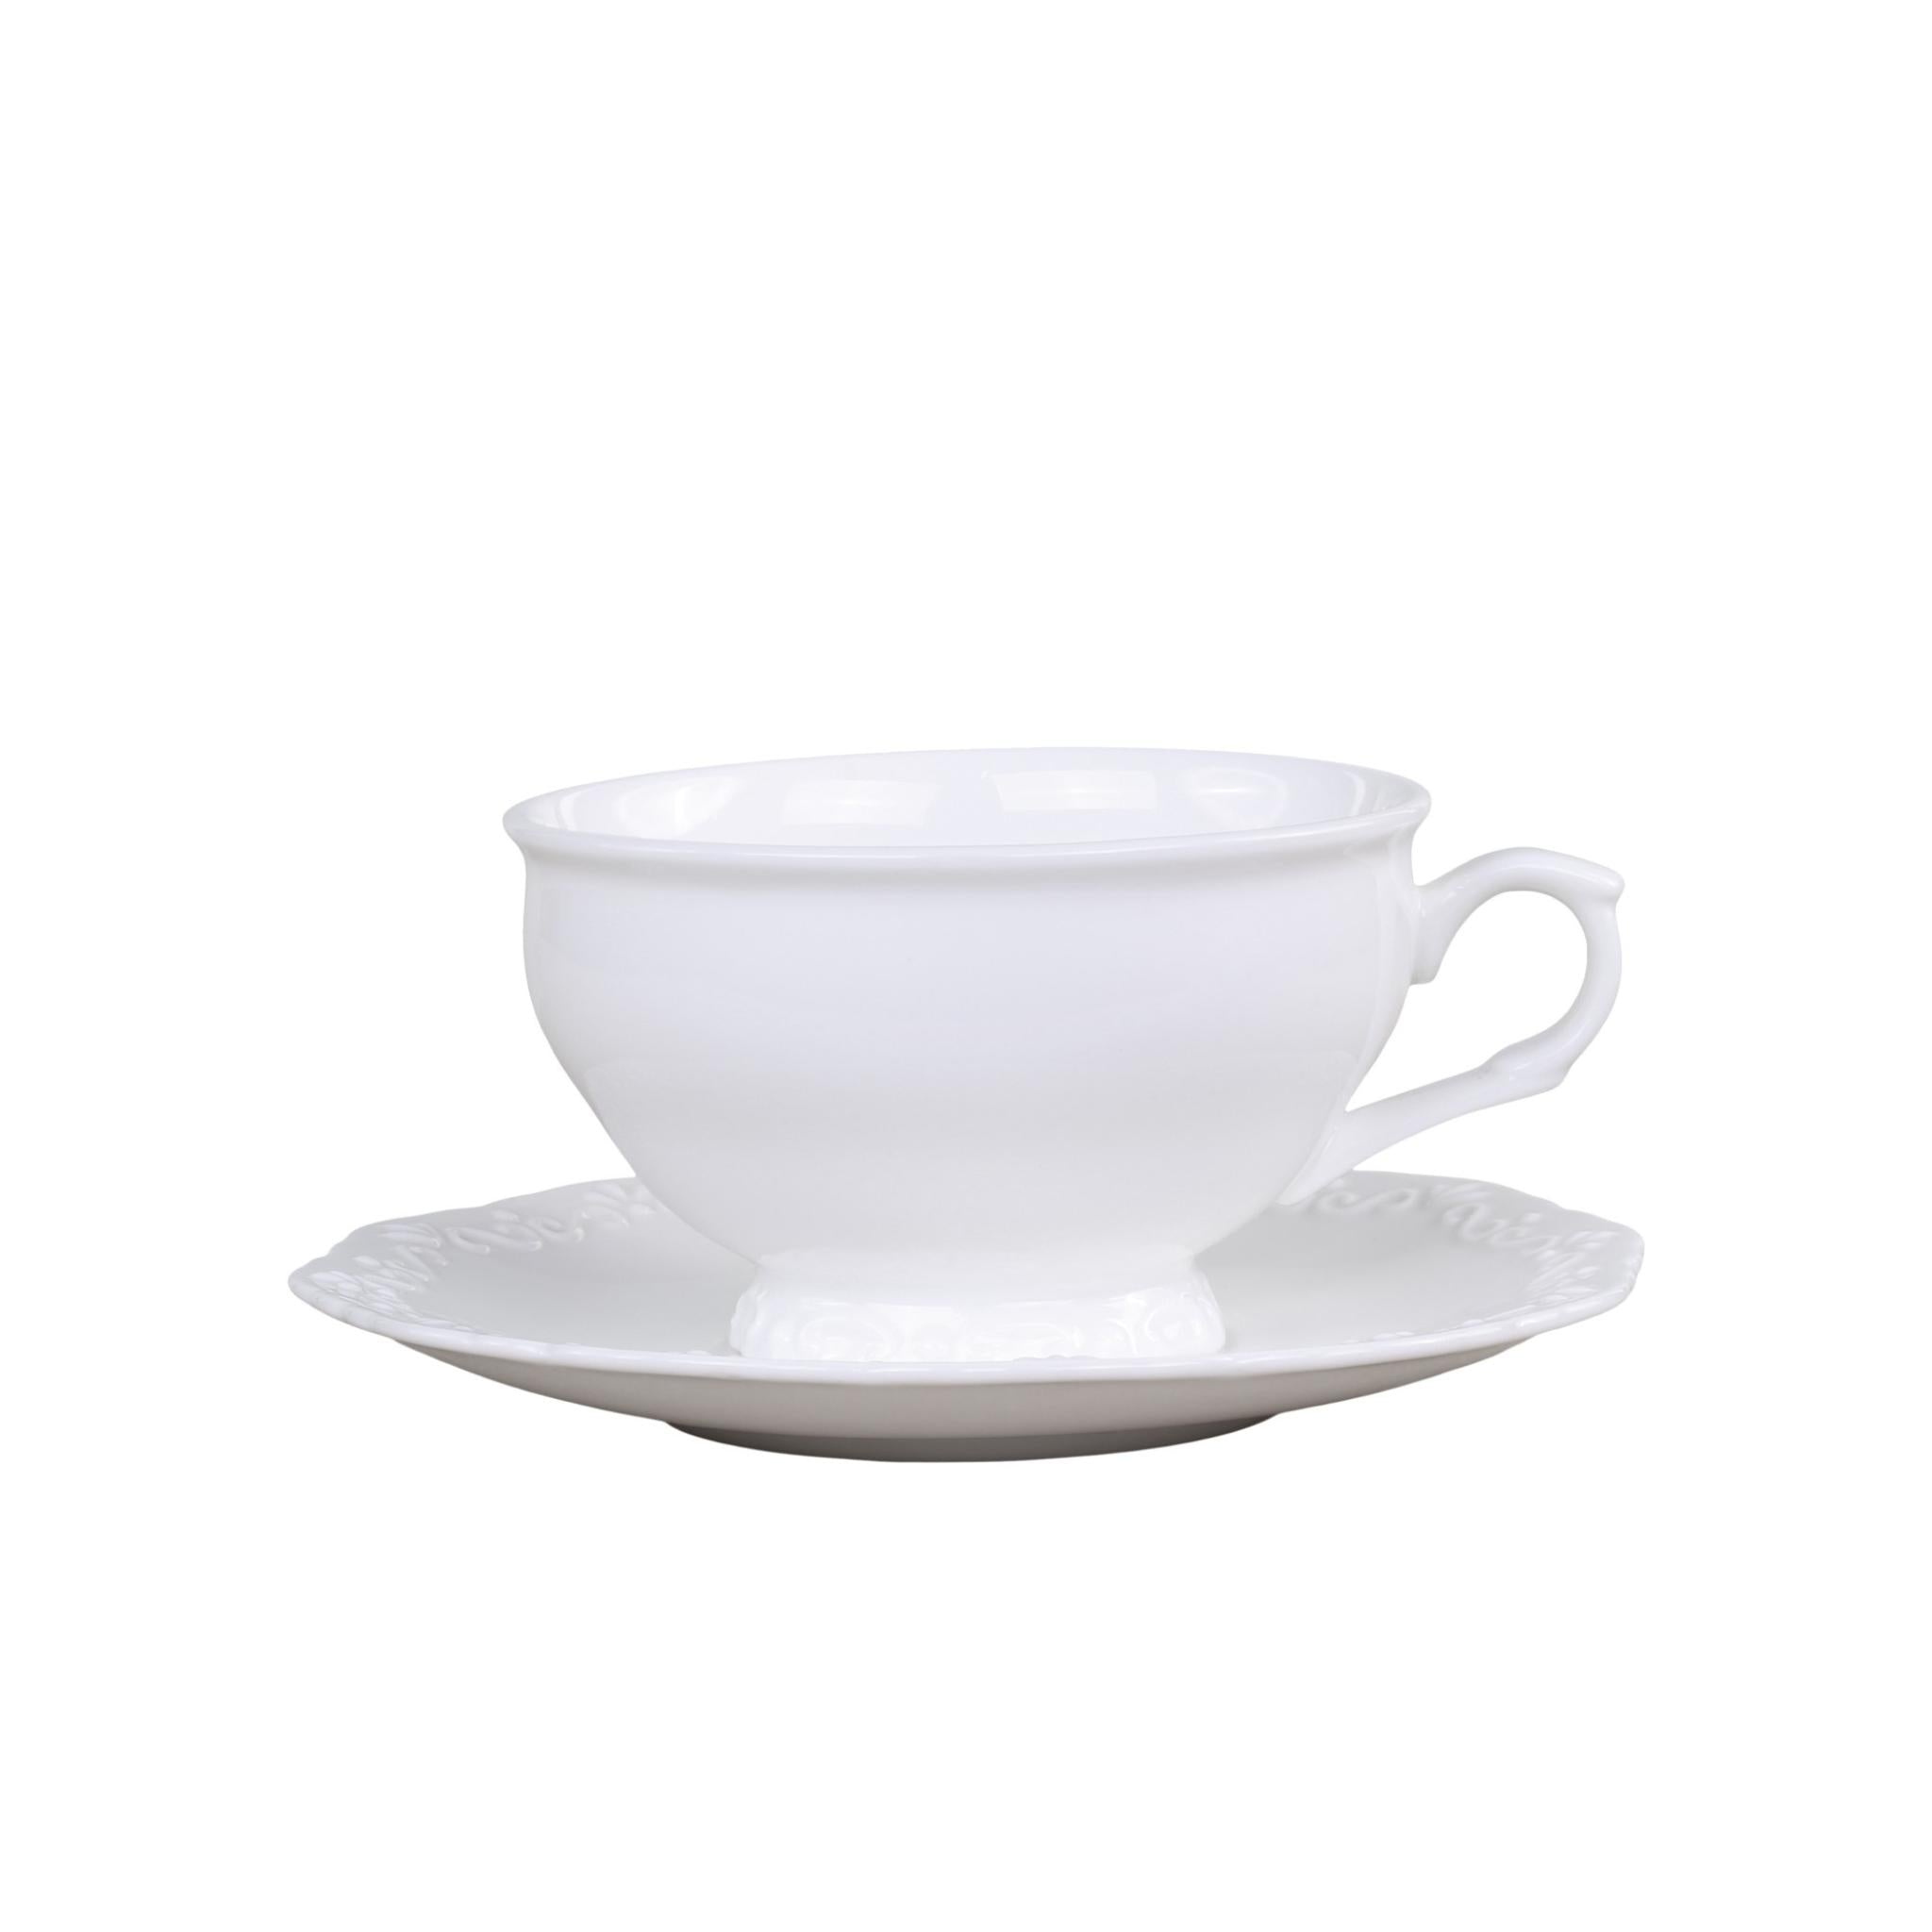 Provence Teacup with Saucer